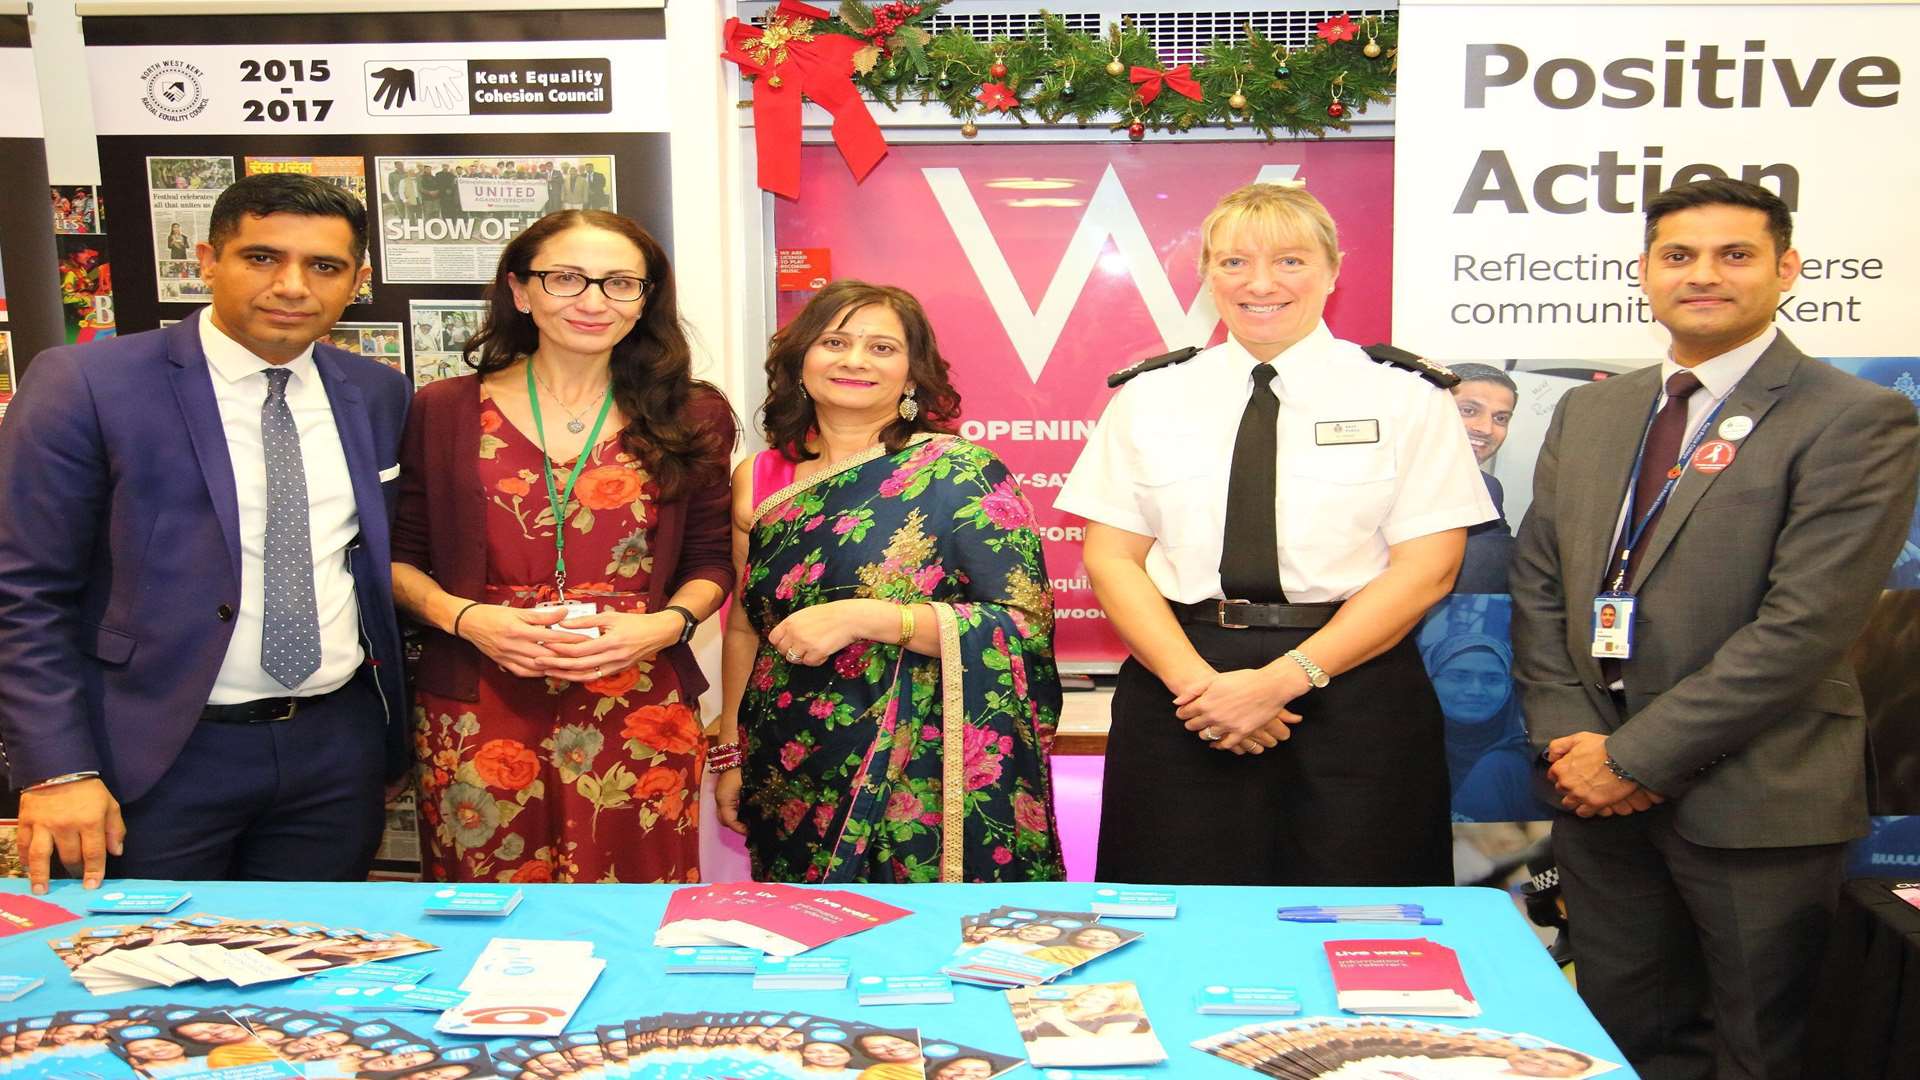 Gurvinder Sandher of the Kent Equality Cohesion Council, Kath Donald from Gravesham council, Carol Gosal of Rethink Mental Illness, Asst Chf Con Jo Shiner from Kent Police and Suki Randhawa of Kent Police Positive Action